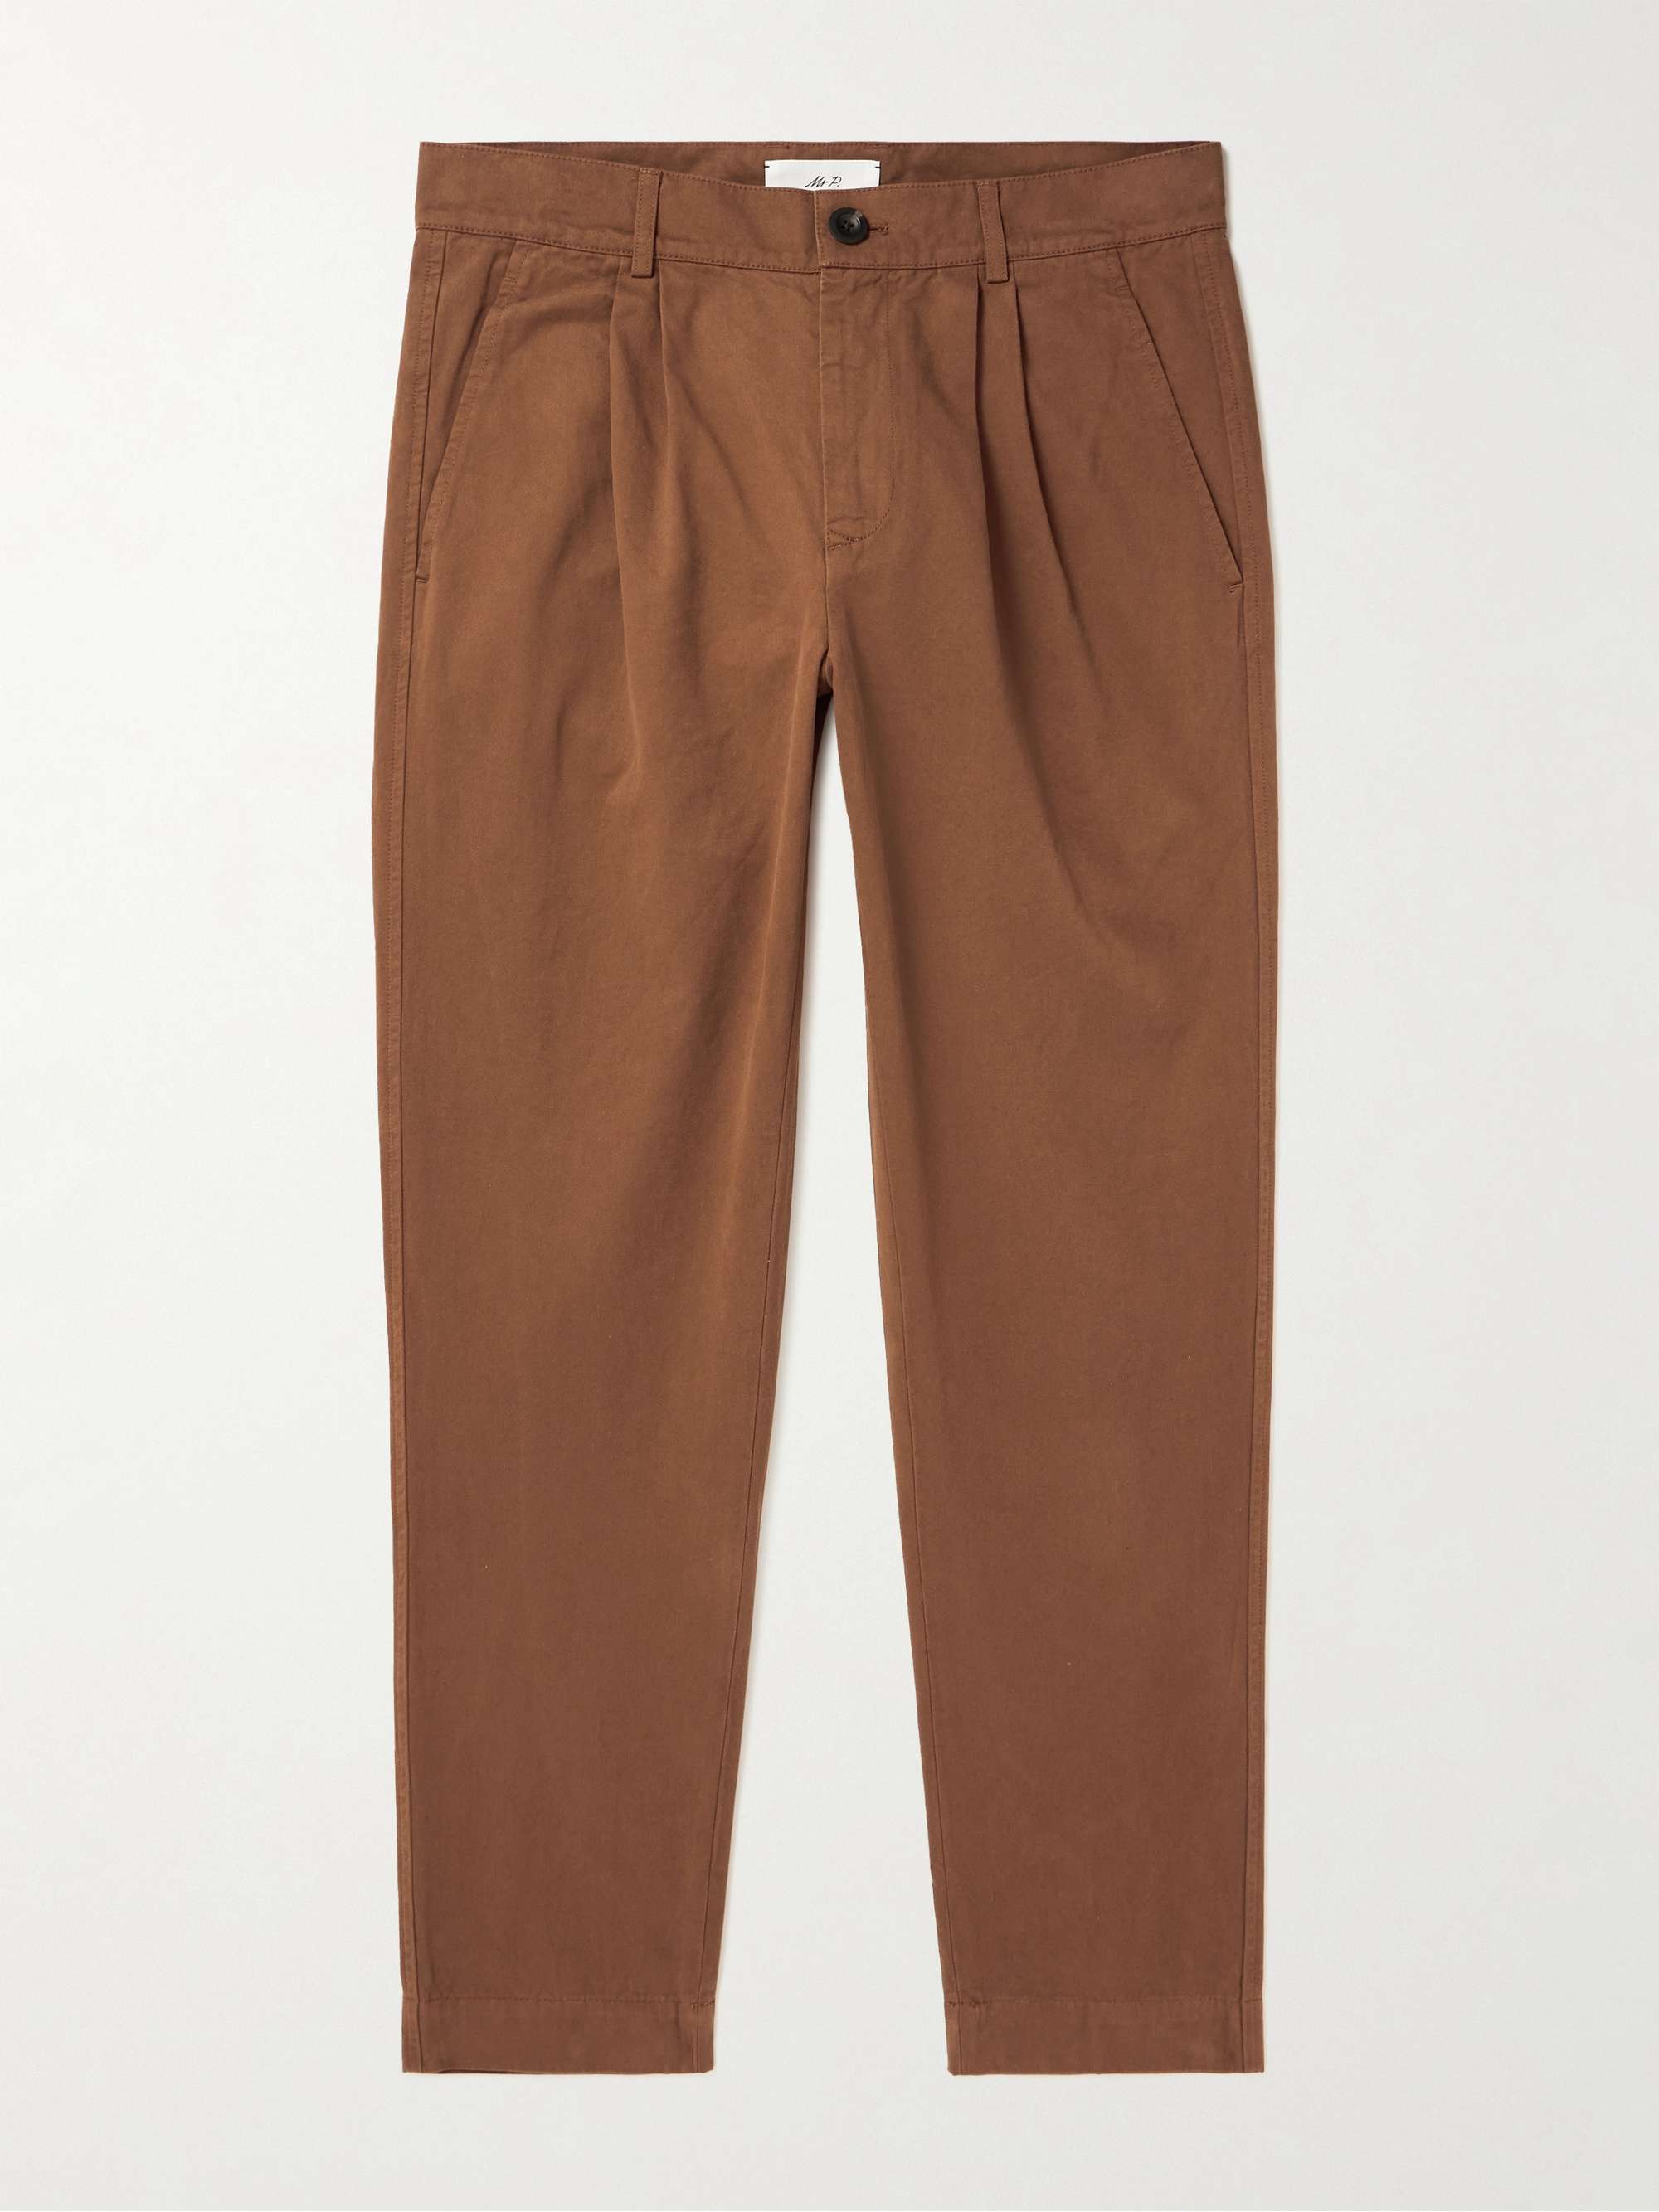 Grant Olive Heavy Cotton Twill Trousers – Kit Blake